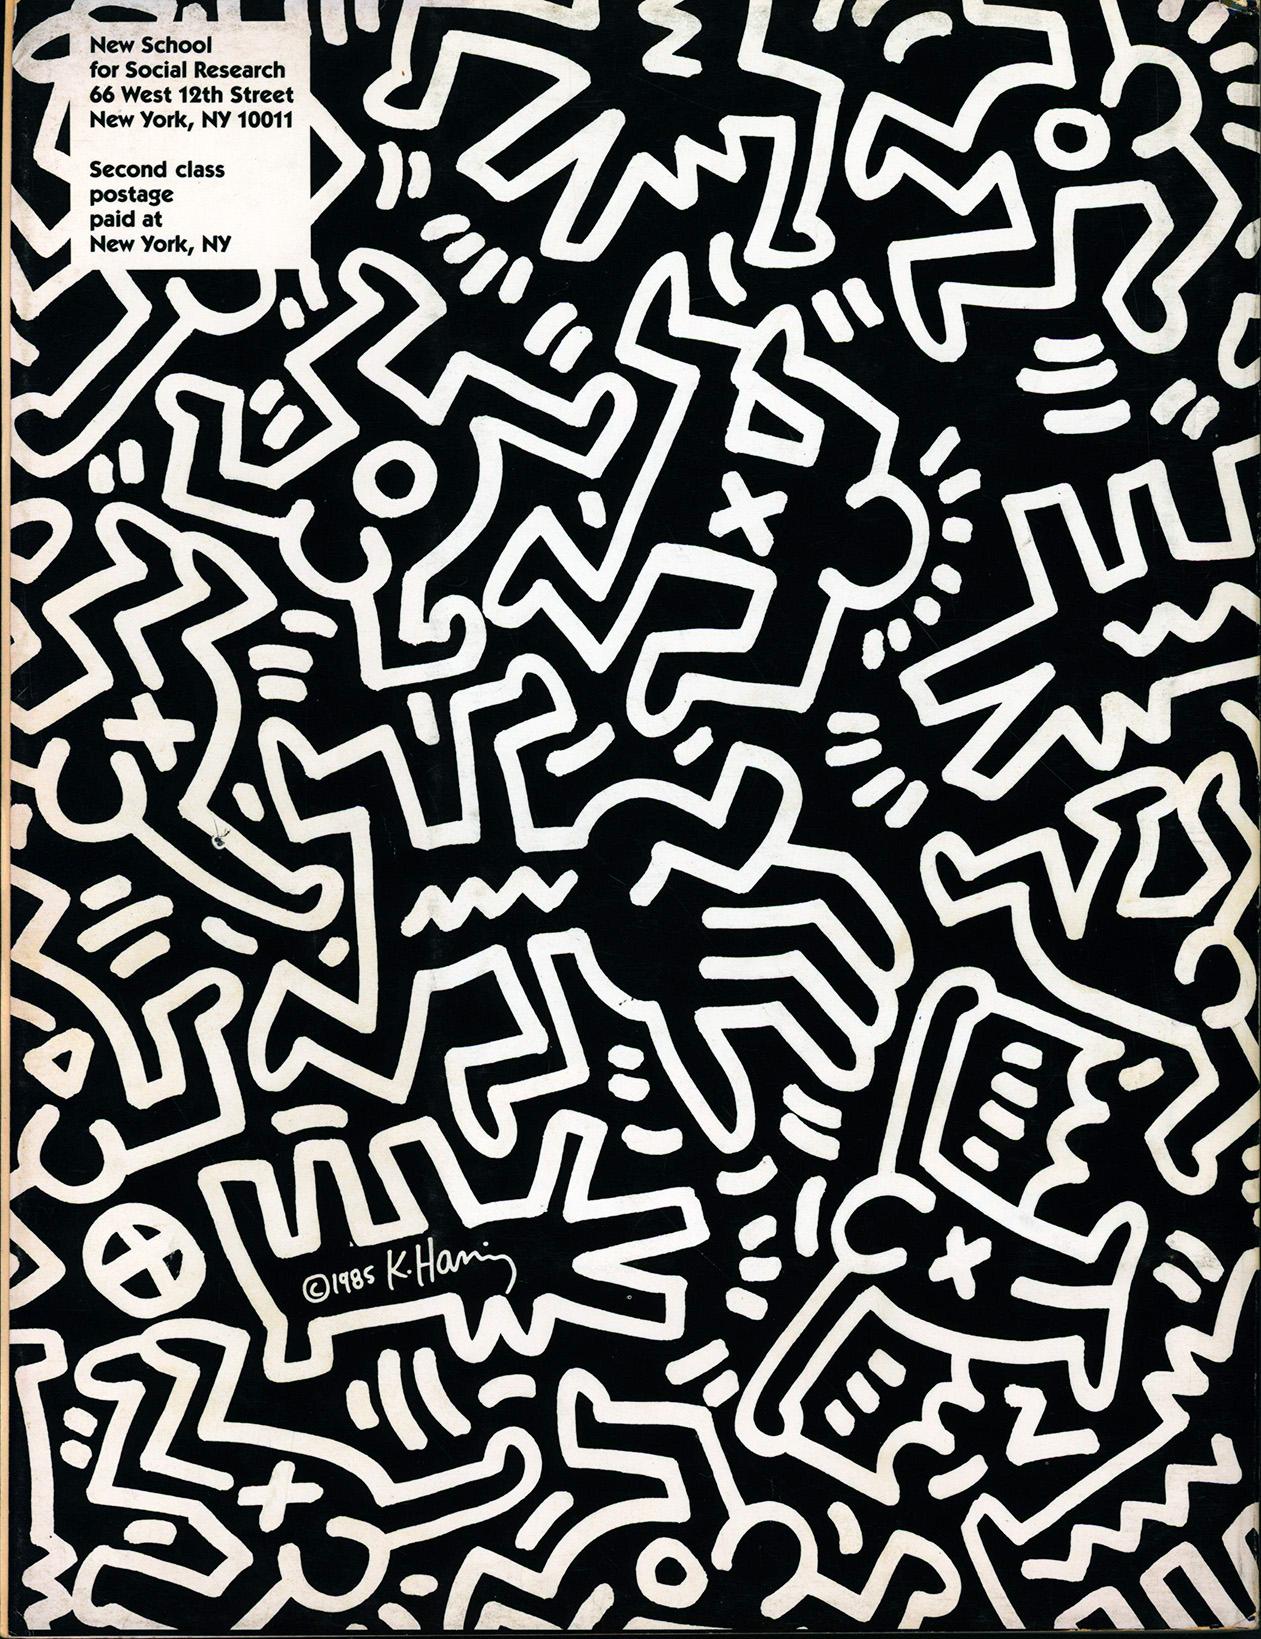 Keith Haring Illustration art 1986:
Rare seldom available 1980s Keith Haring illustrated New School university catalog featuring Haring double-sided cover art and a printed signature. Quite scarce, especially in good condition as presented